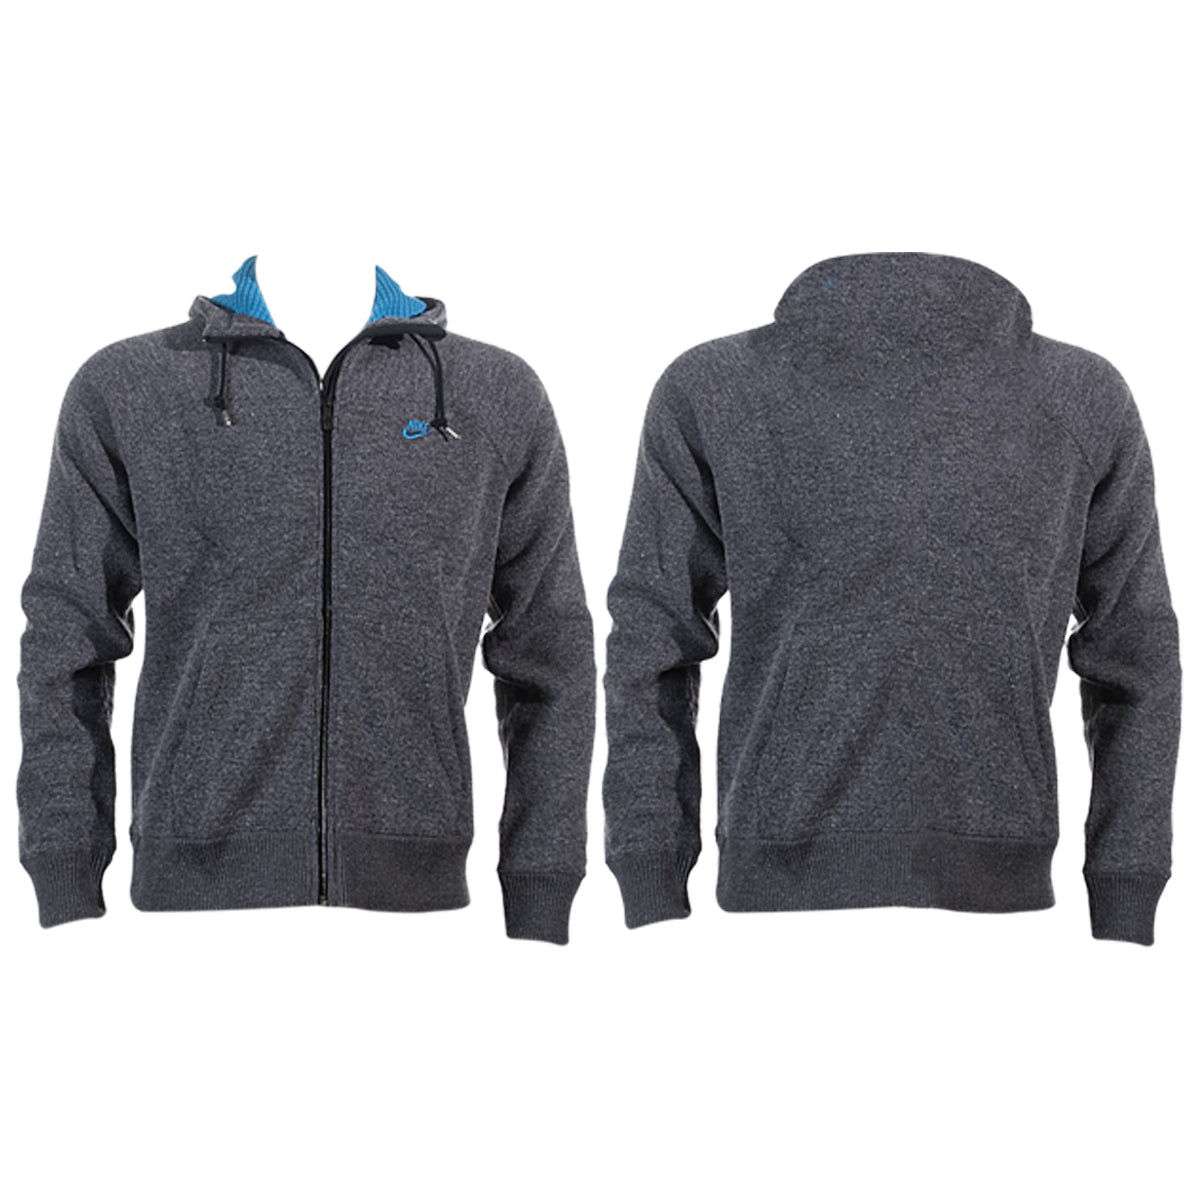 Nike Aw77 Ascent Wool Hoodie Mens Style : 439291